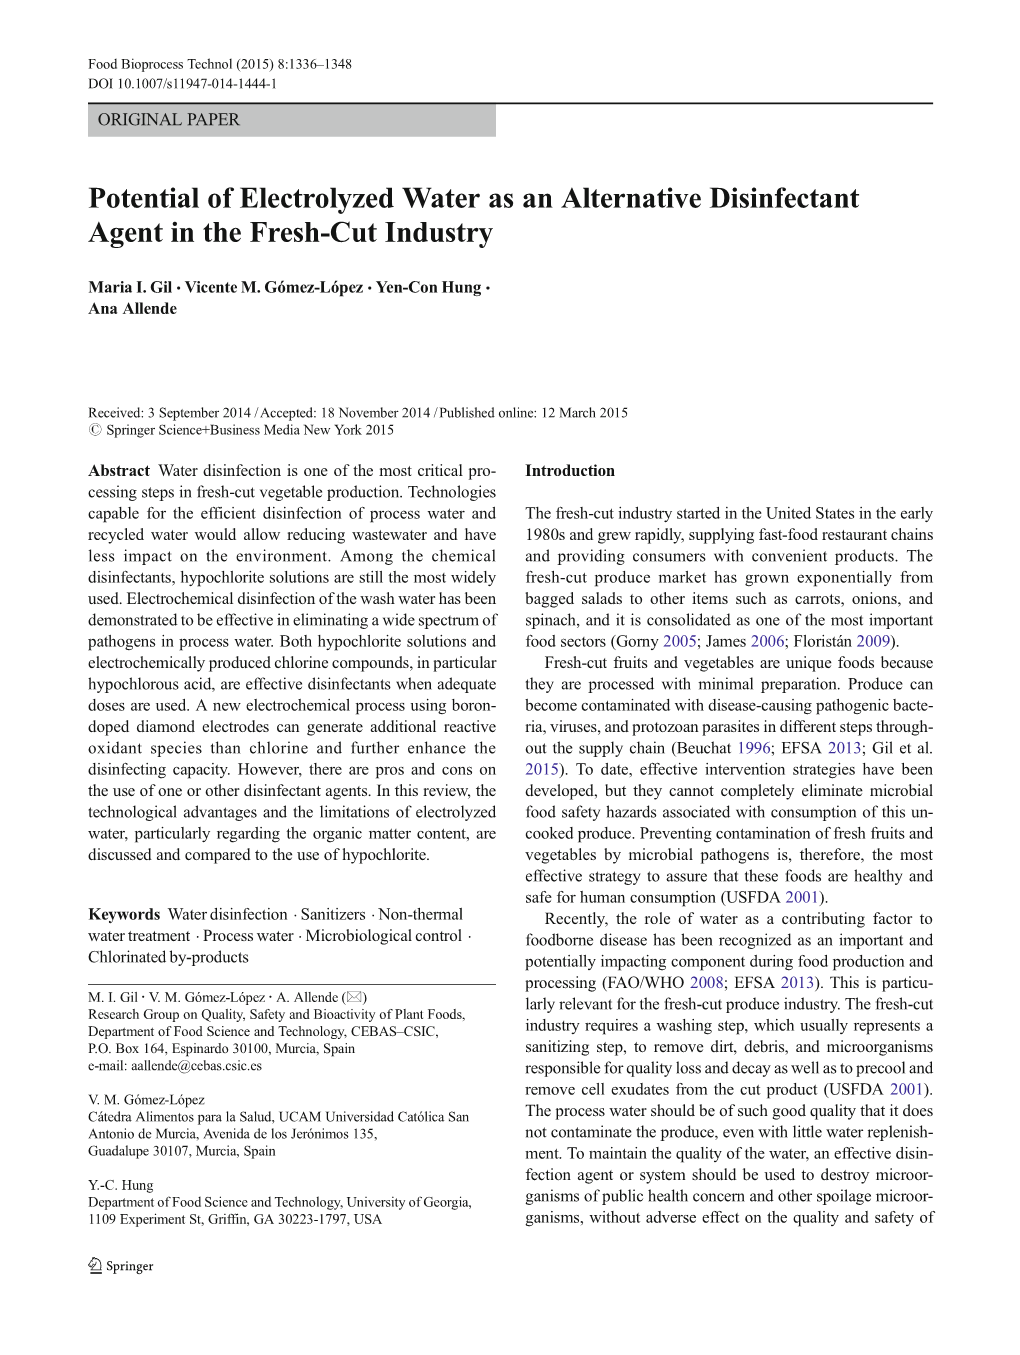 Potential of Electrolyzed Water As an Alternative Disinfectant Agent in the Fresh-Cut Industry